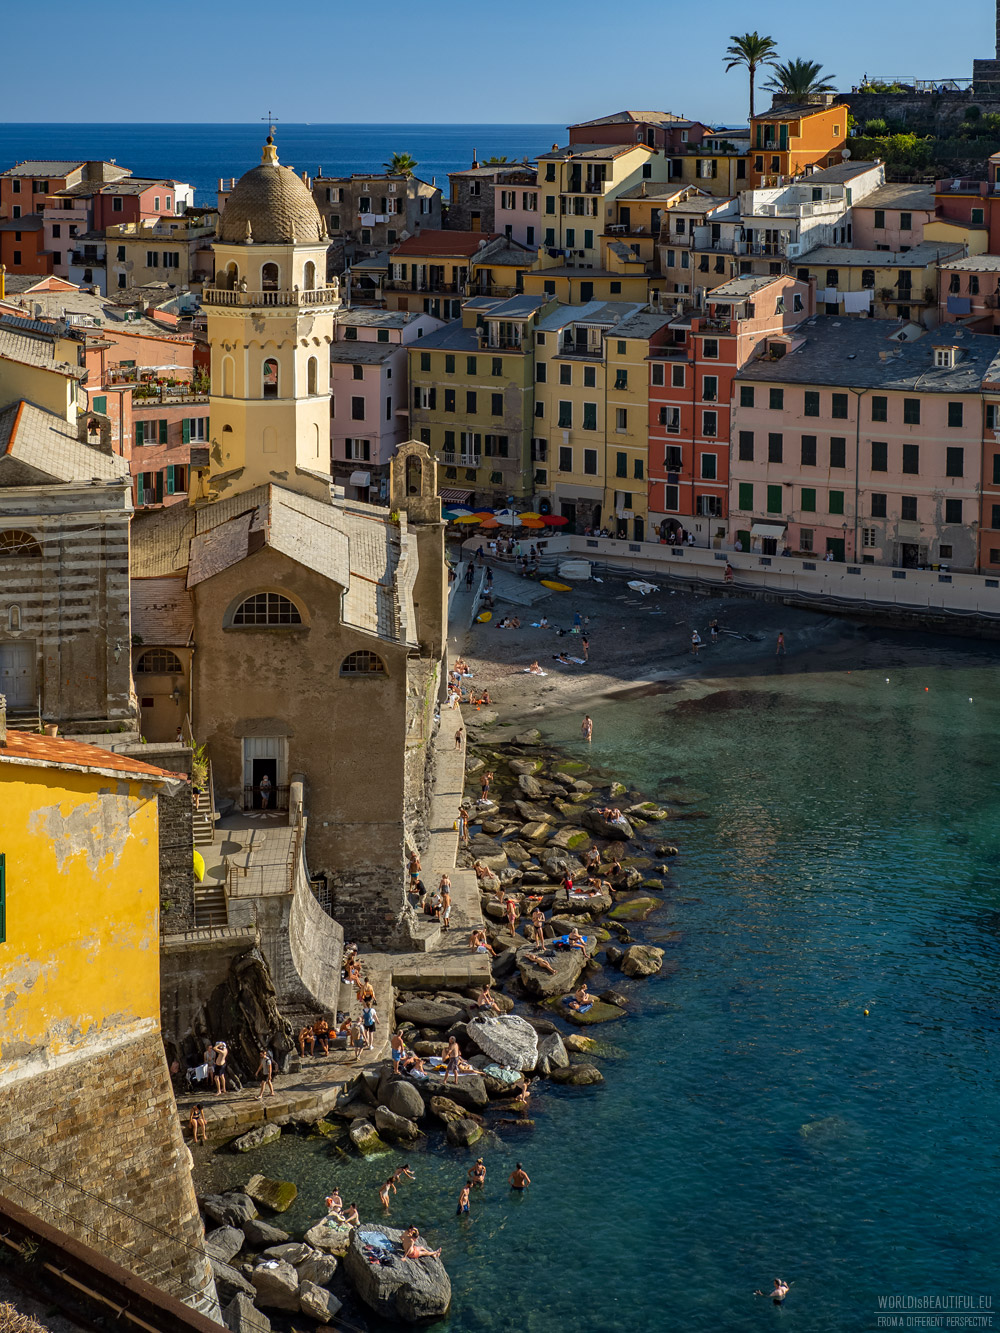 Vernazza - beach in the town center